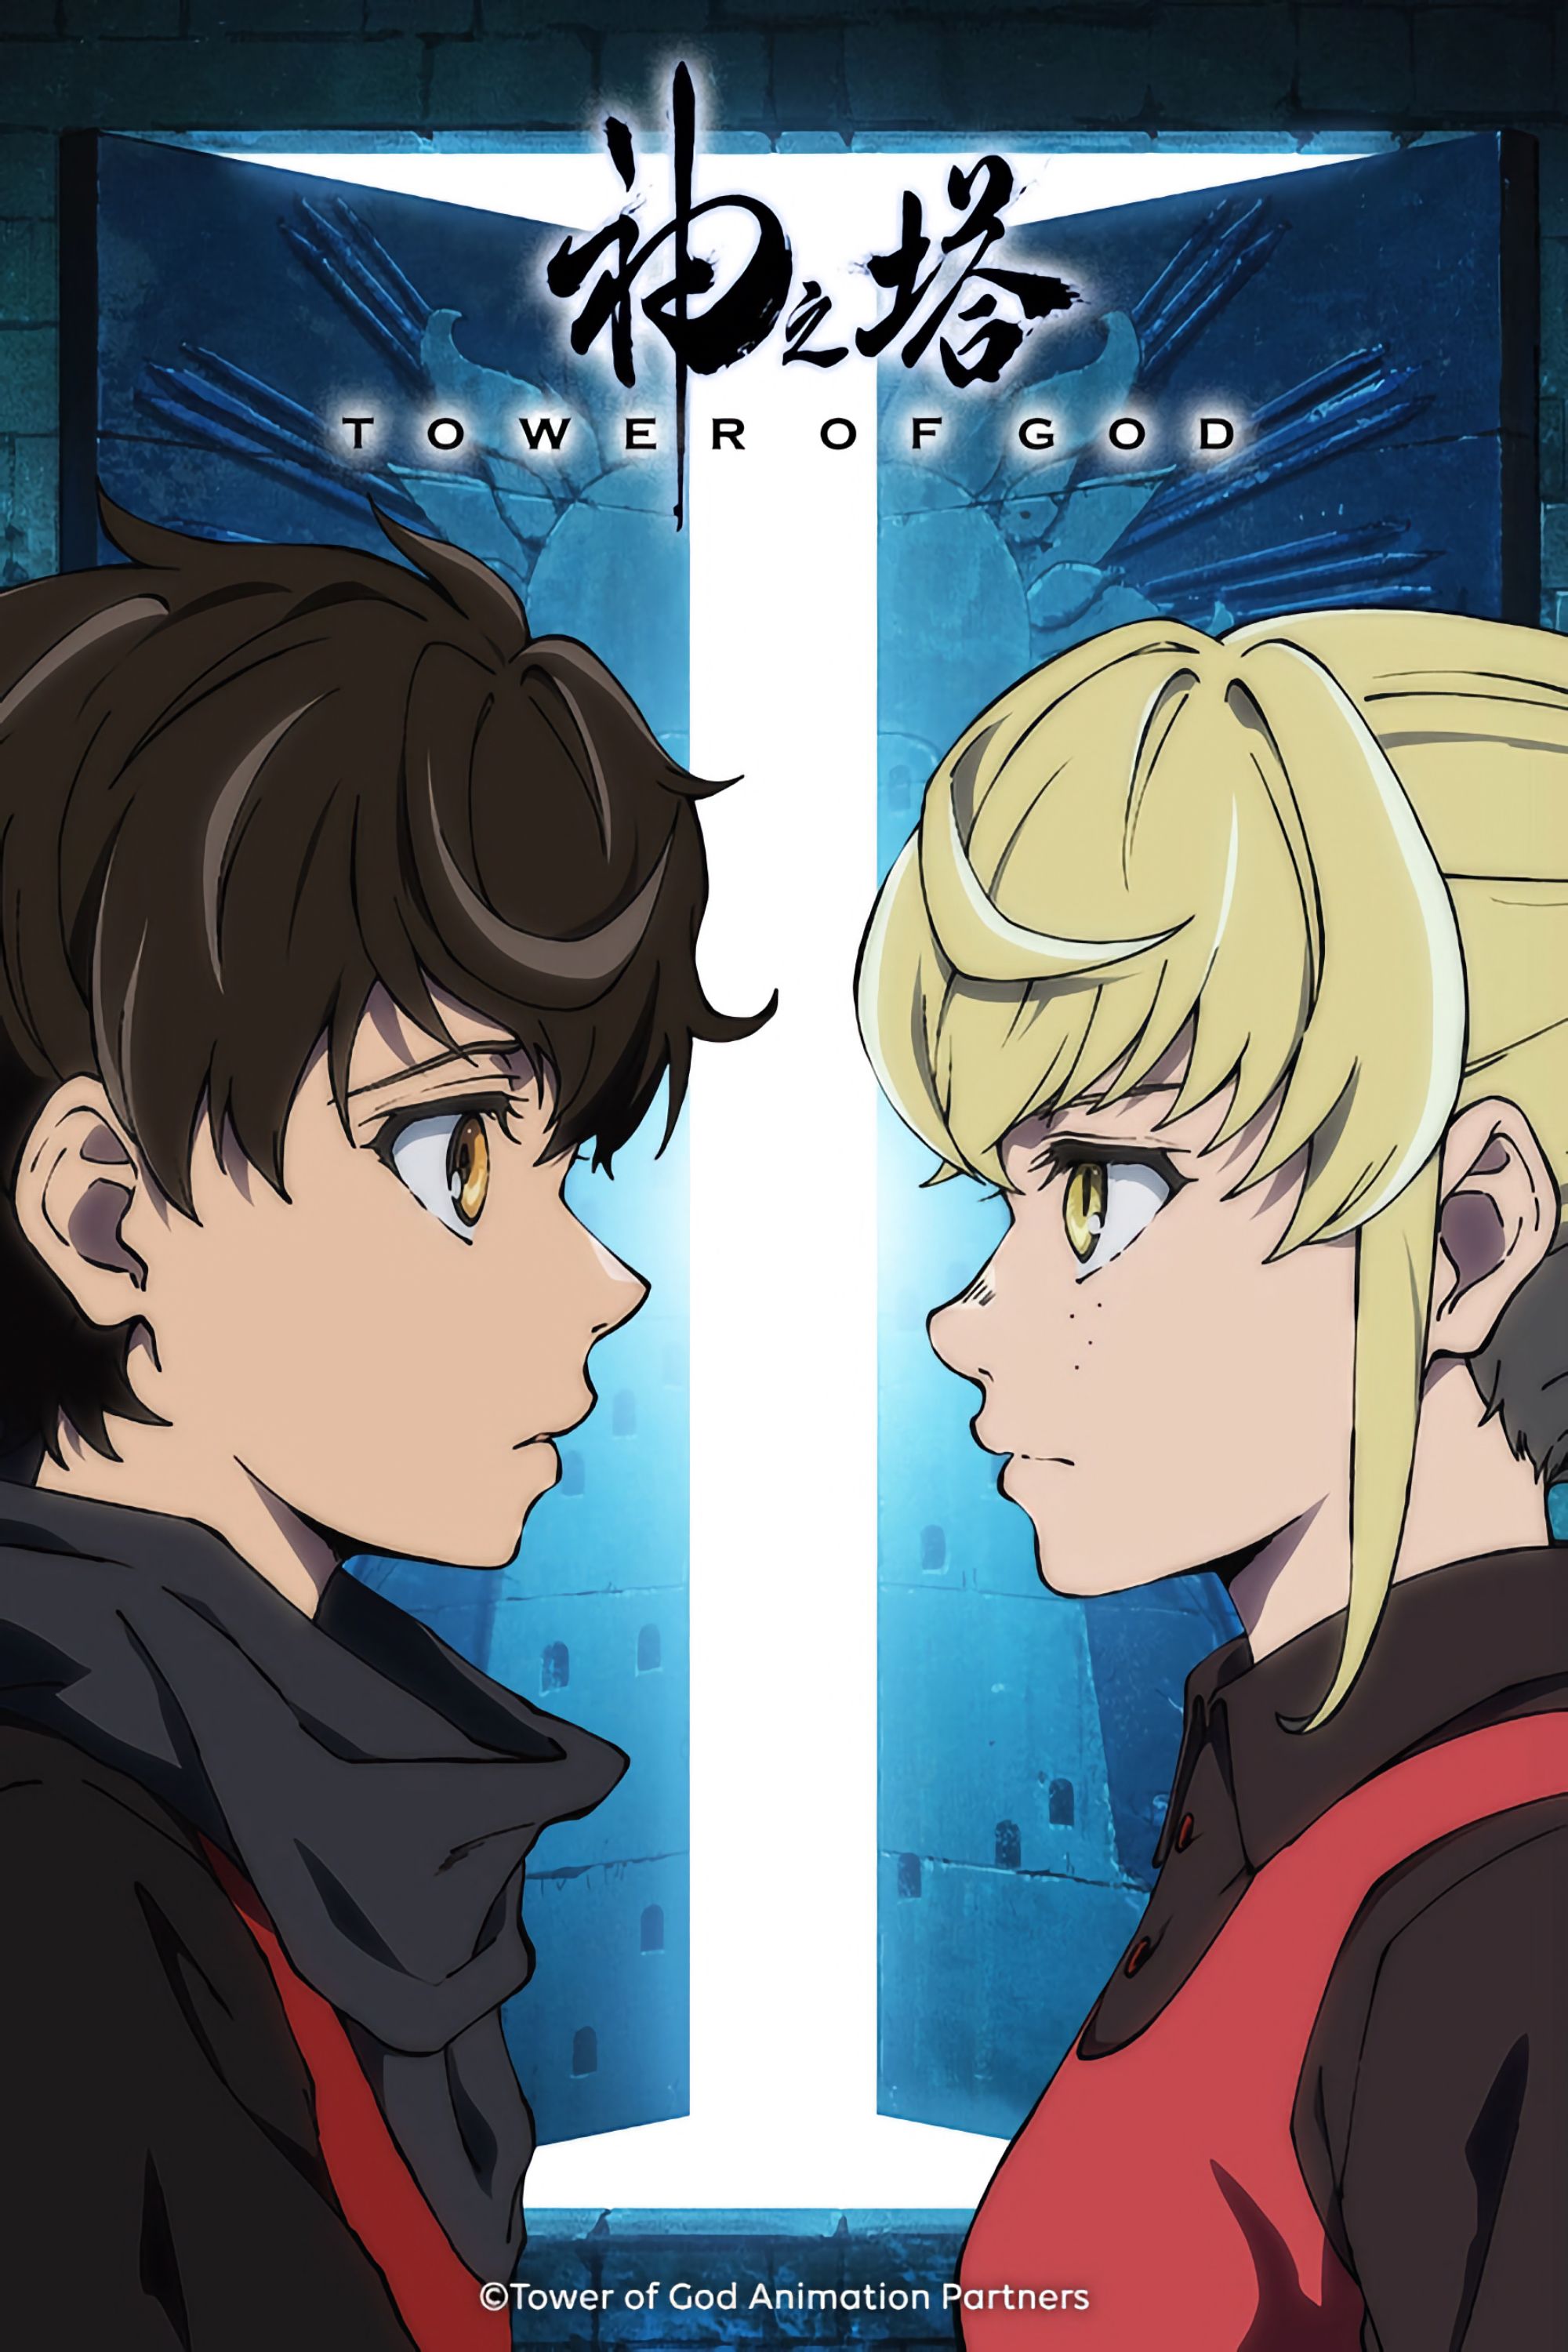 Anime News And Facts on X: [RUMOURED] Tower of God Season 2 will be  announced soon #towerofgod #kaminotou  / X